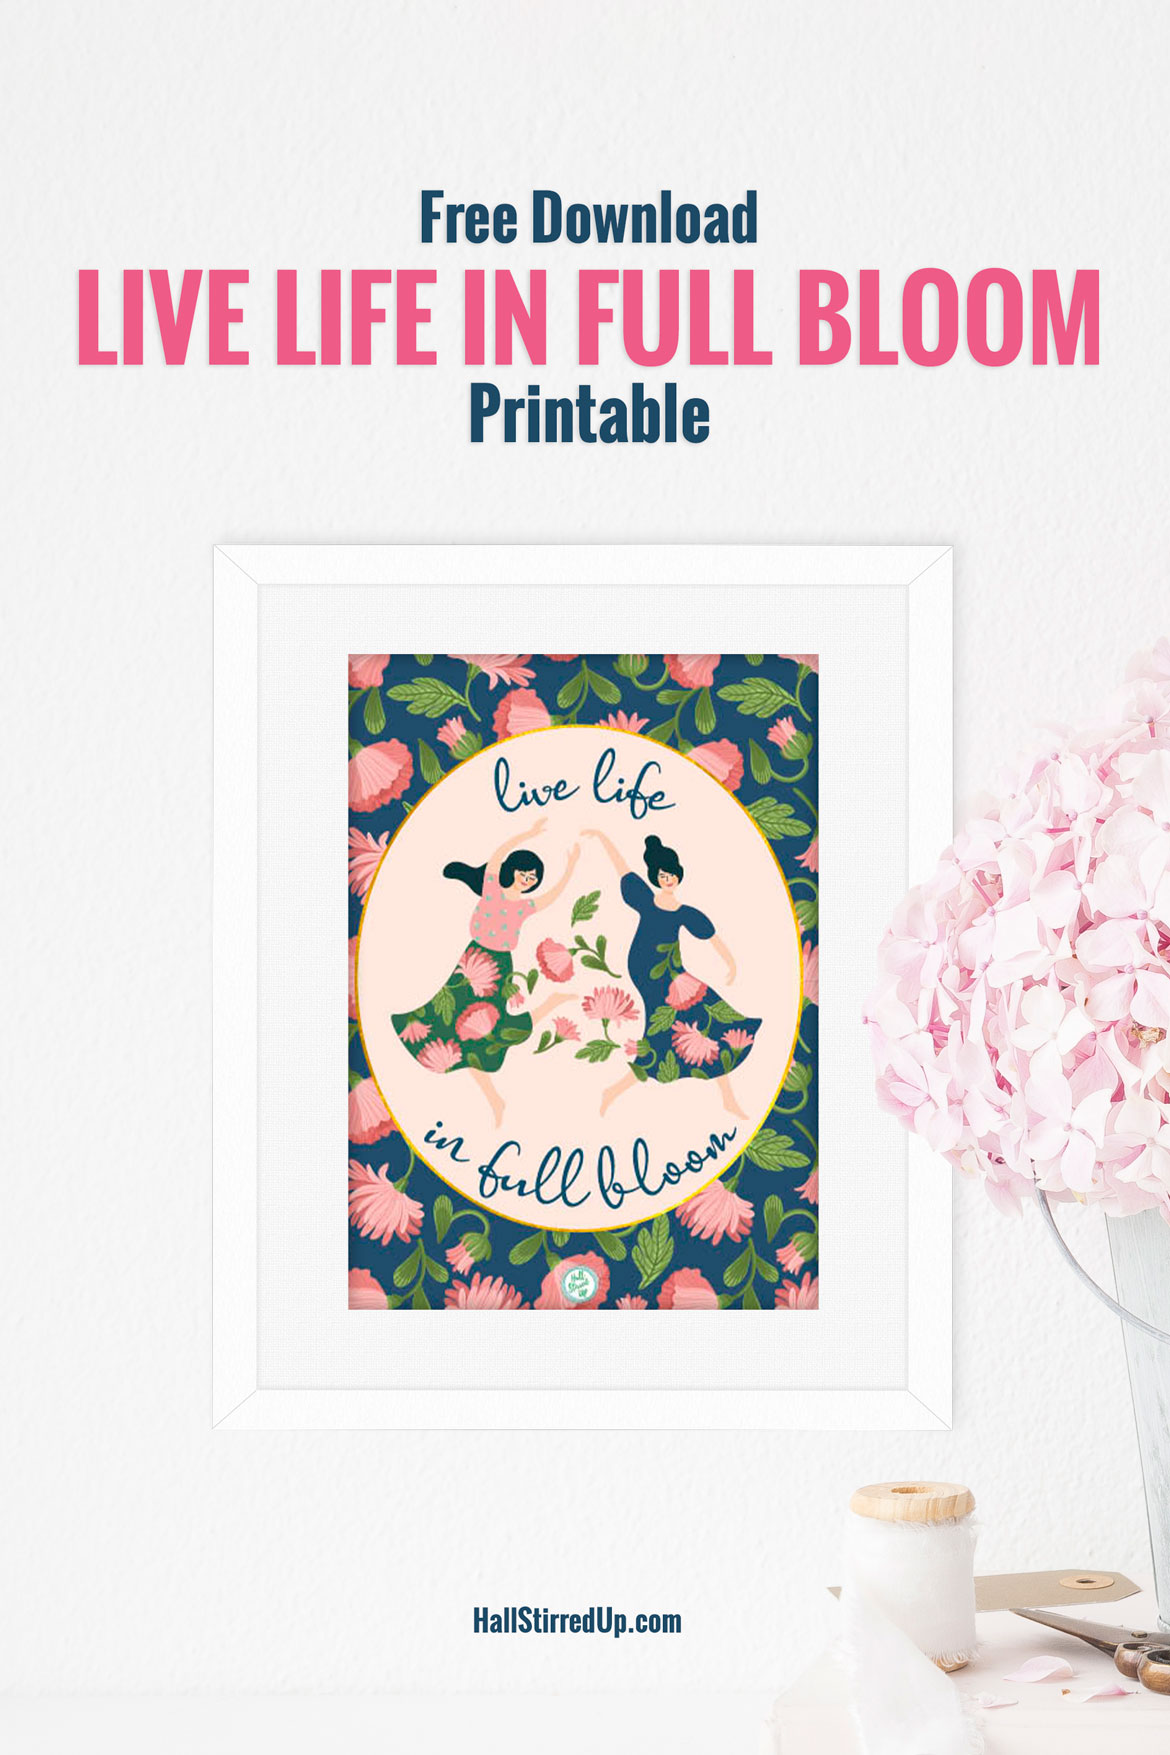 Favorite flower quotes include a fun new 'Live Life in Full Bloom' printable